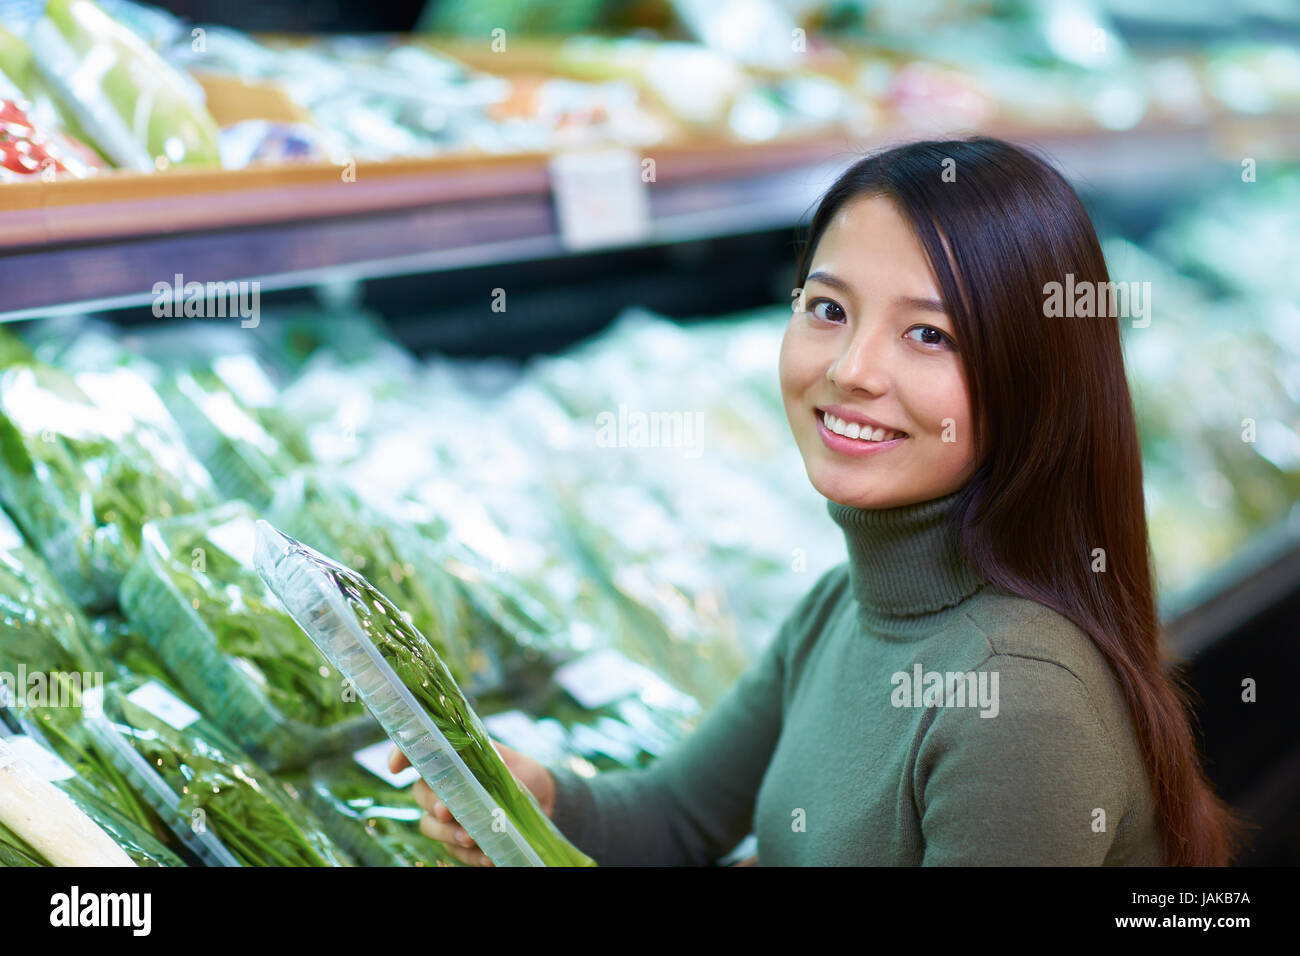 One Young Chinese Woman Shopping in the Supermarket Stock Photo